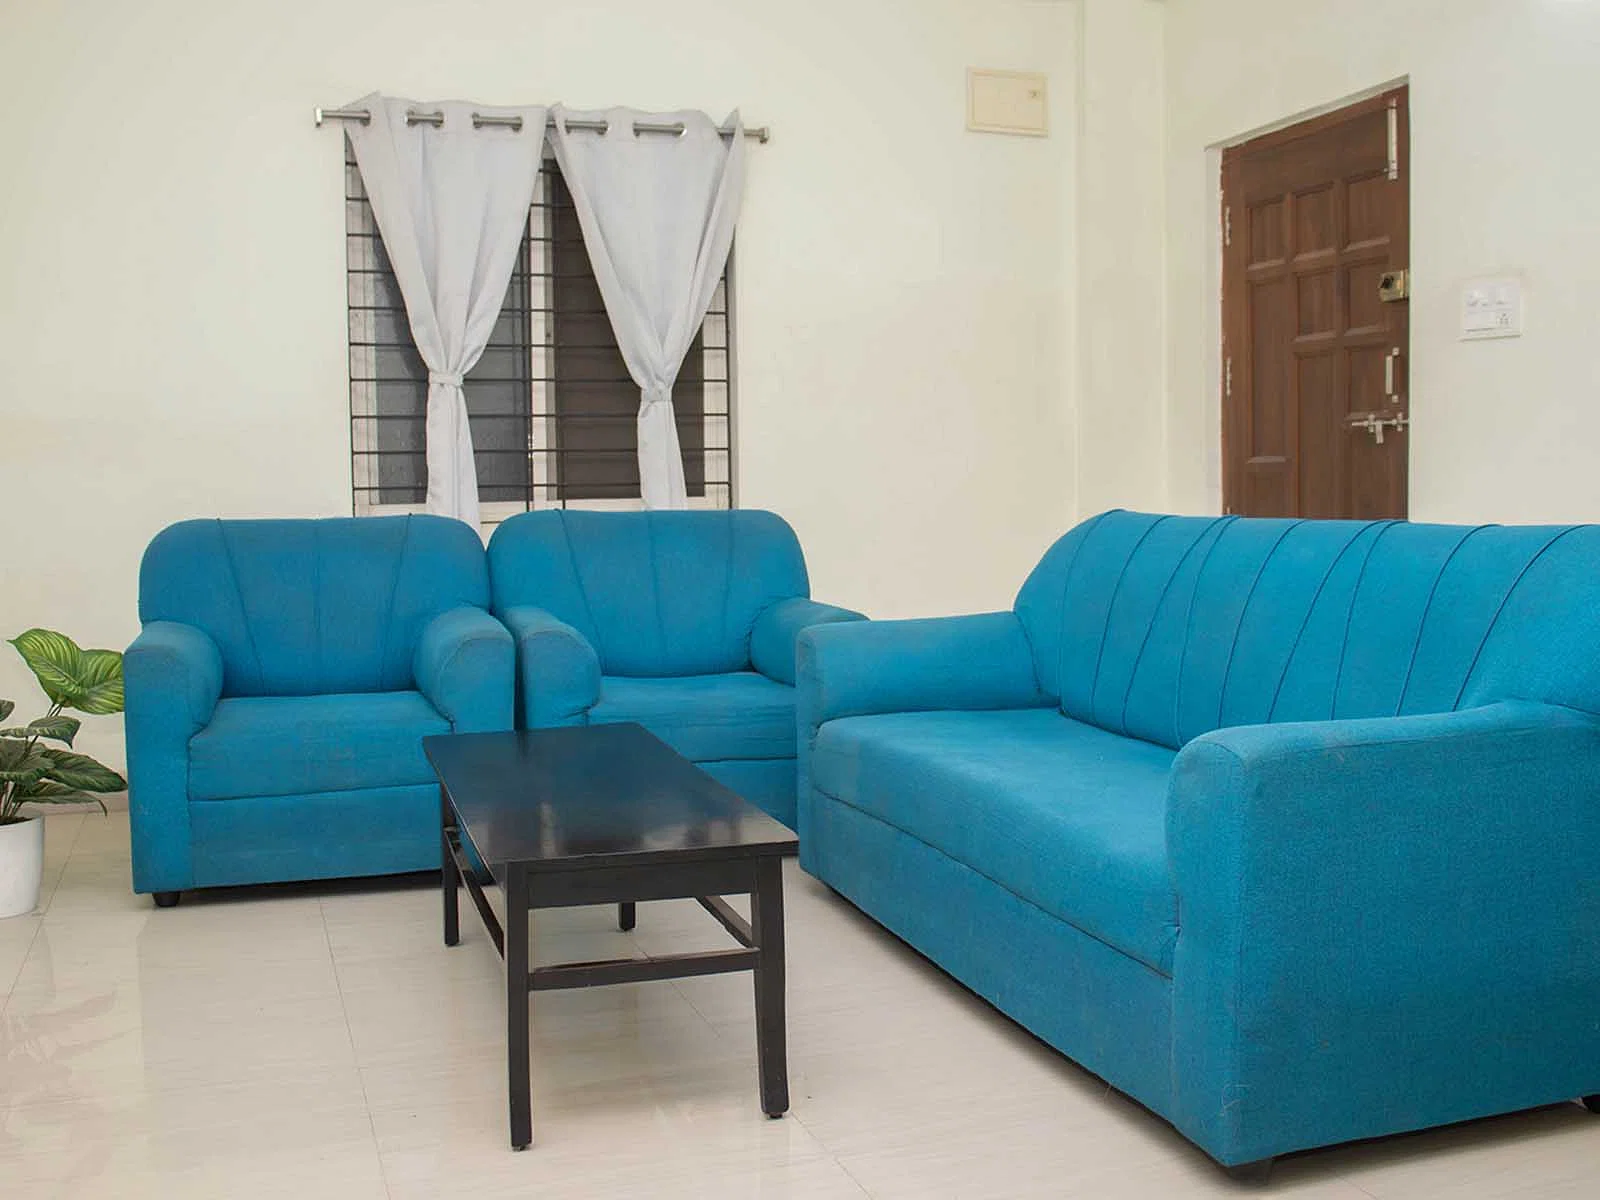 Fully furnished single/sharing rooms for rent in KPHB with no brokerage-apply fast-Zolo Grit